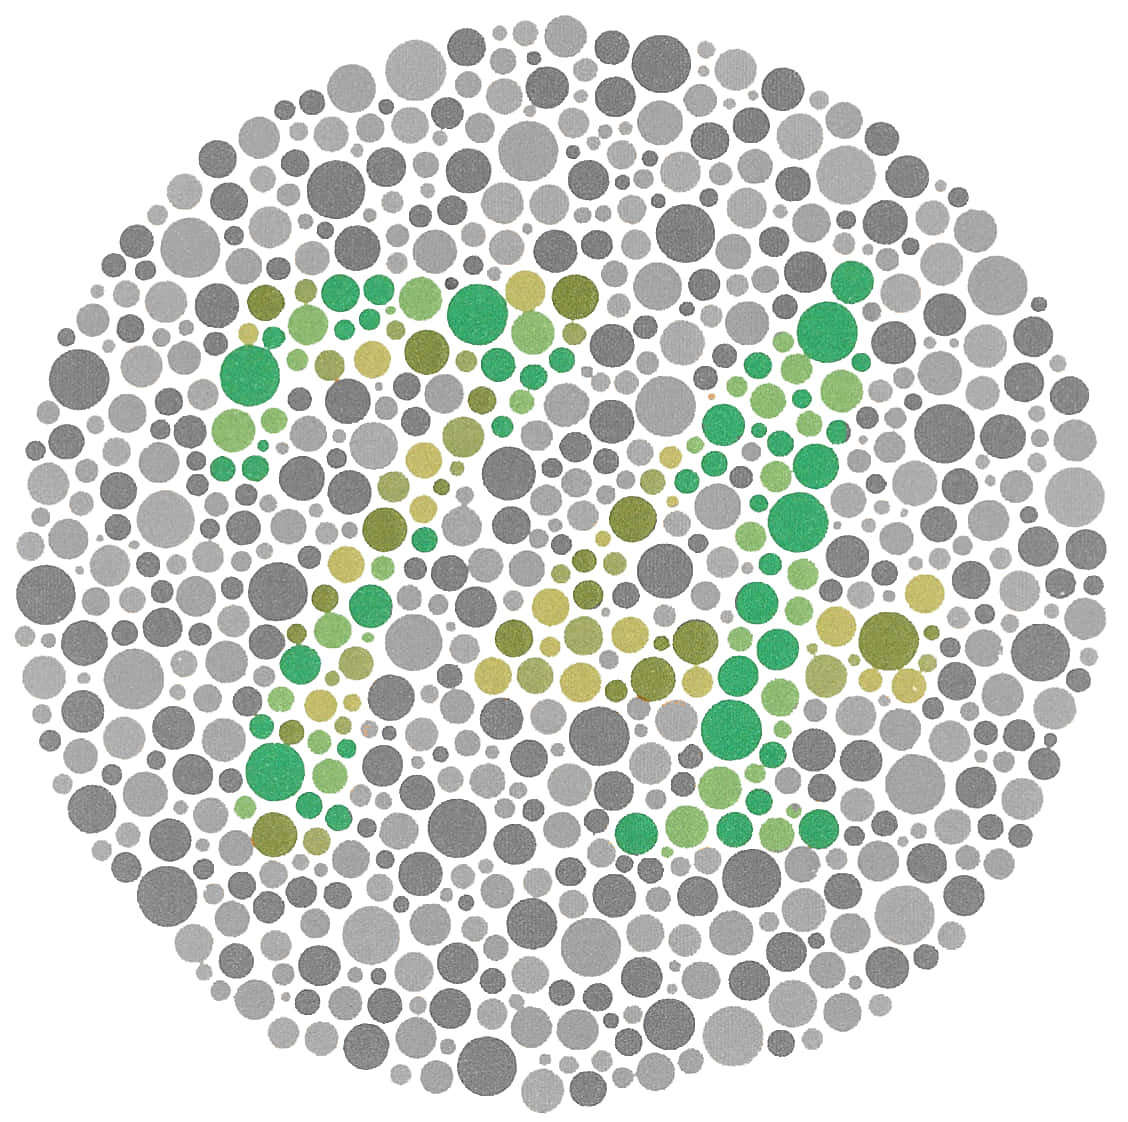 A Green Circle With The Number 74 In It